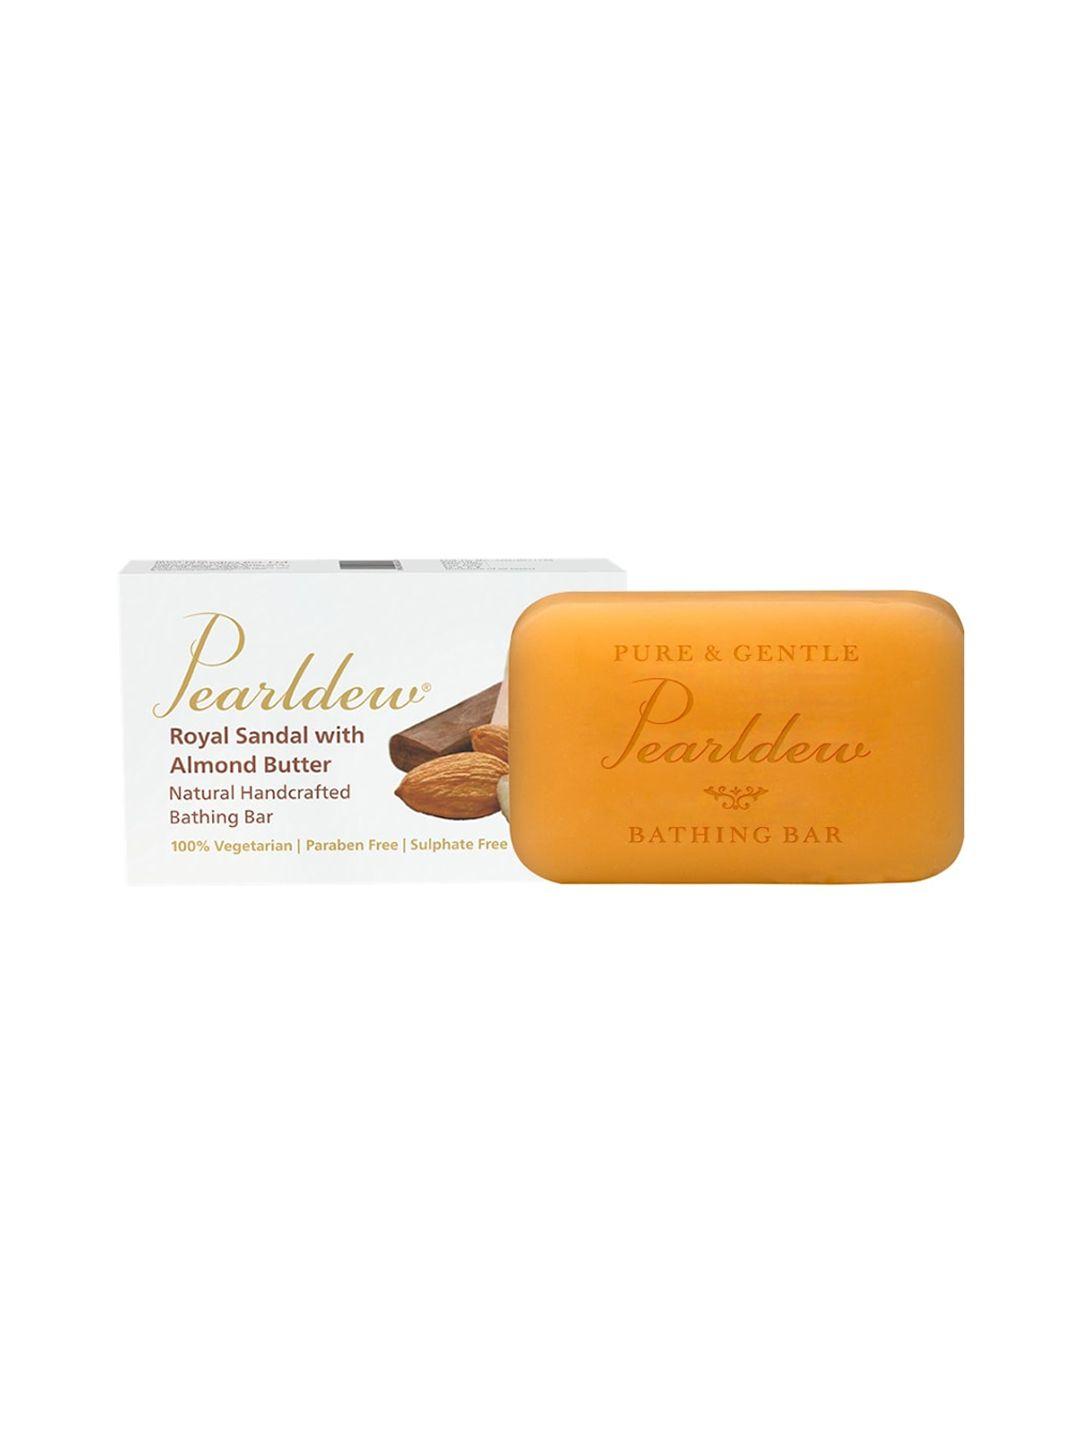 pearldew royal sandal with almond butter natural handcrafted bathing bar soap - 75g